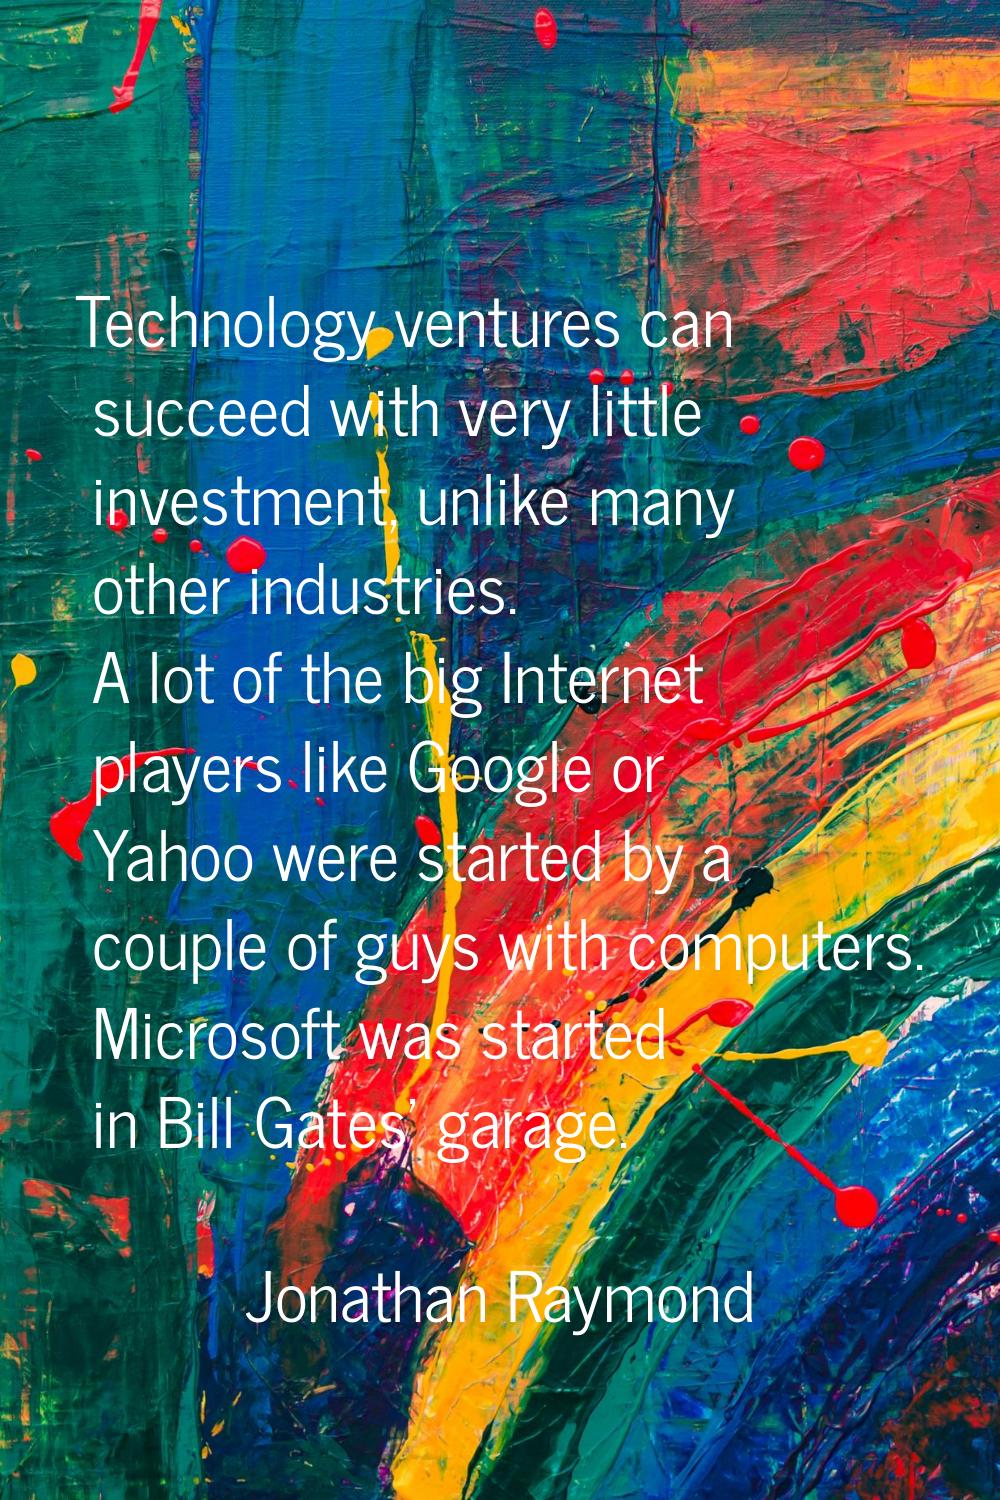 Technology ventures can succeed with very little investment, unlike many other industries. A lot of